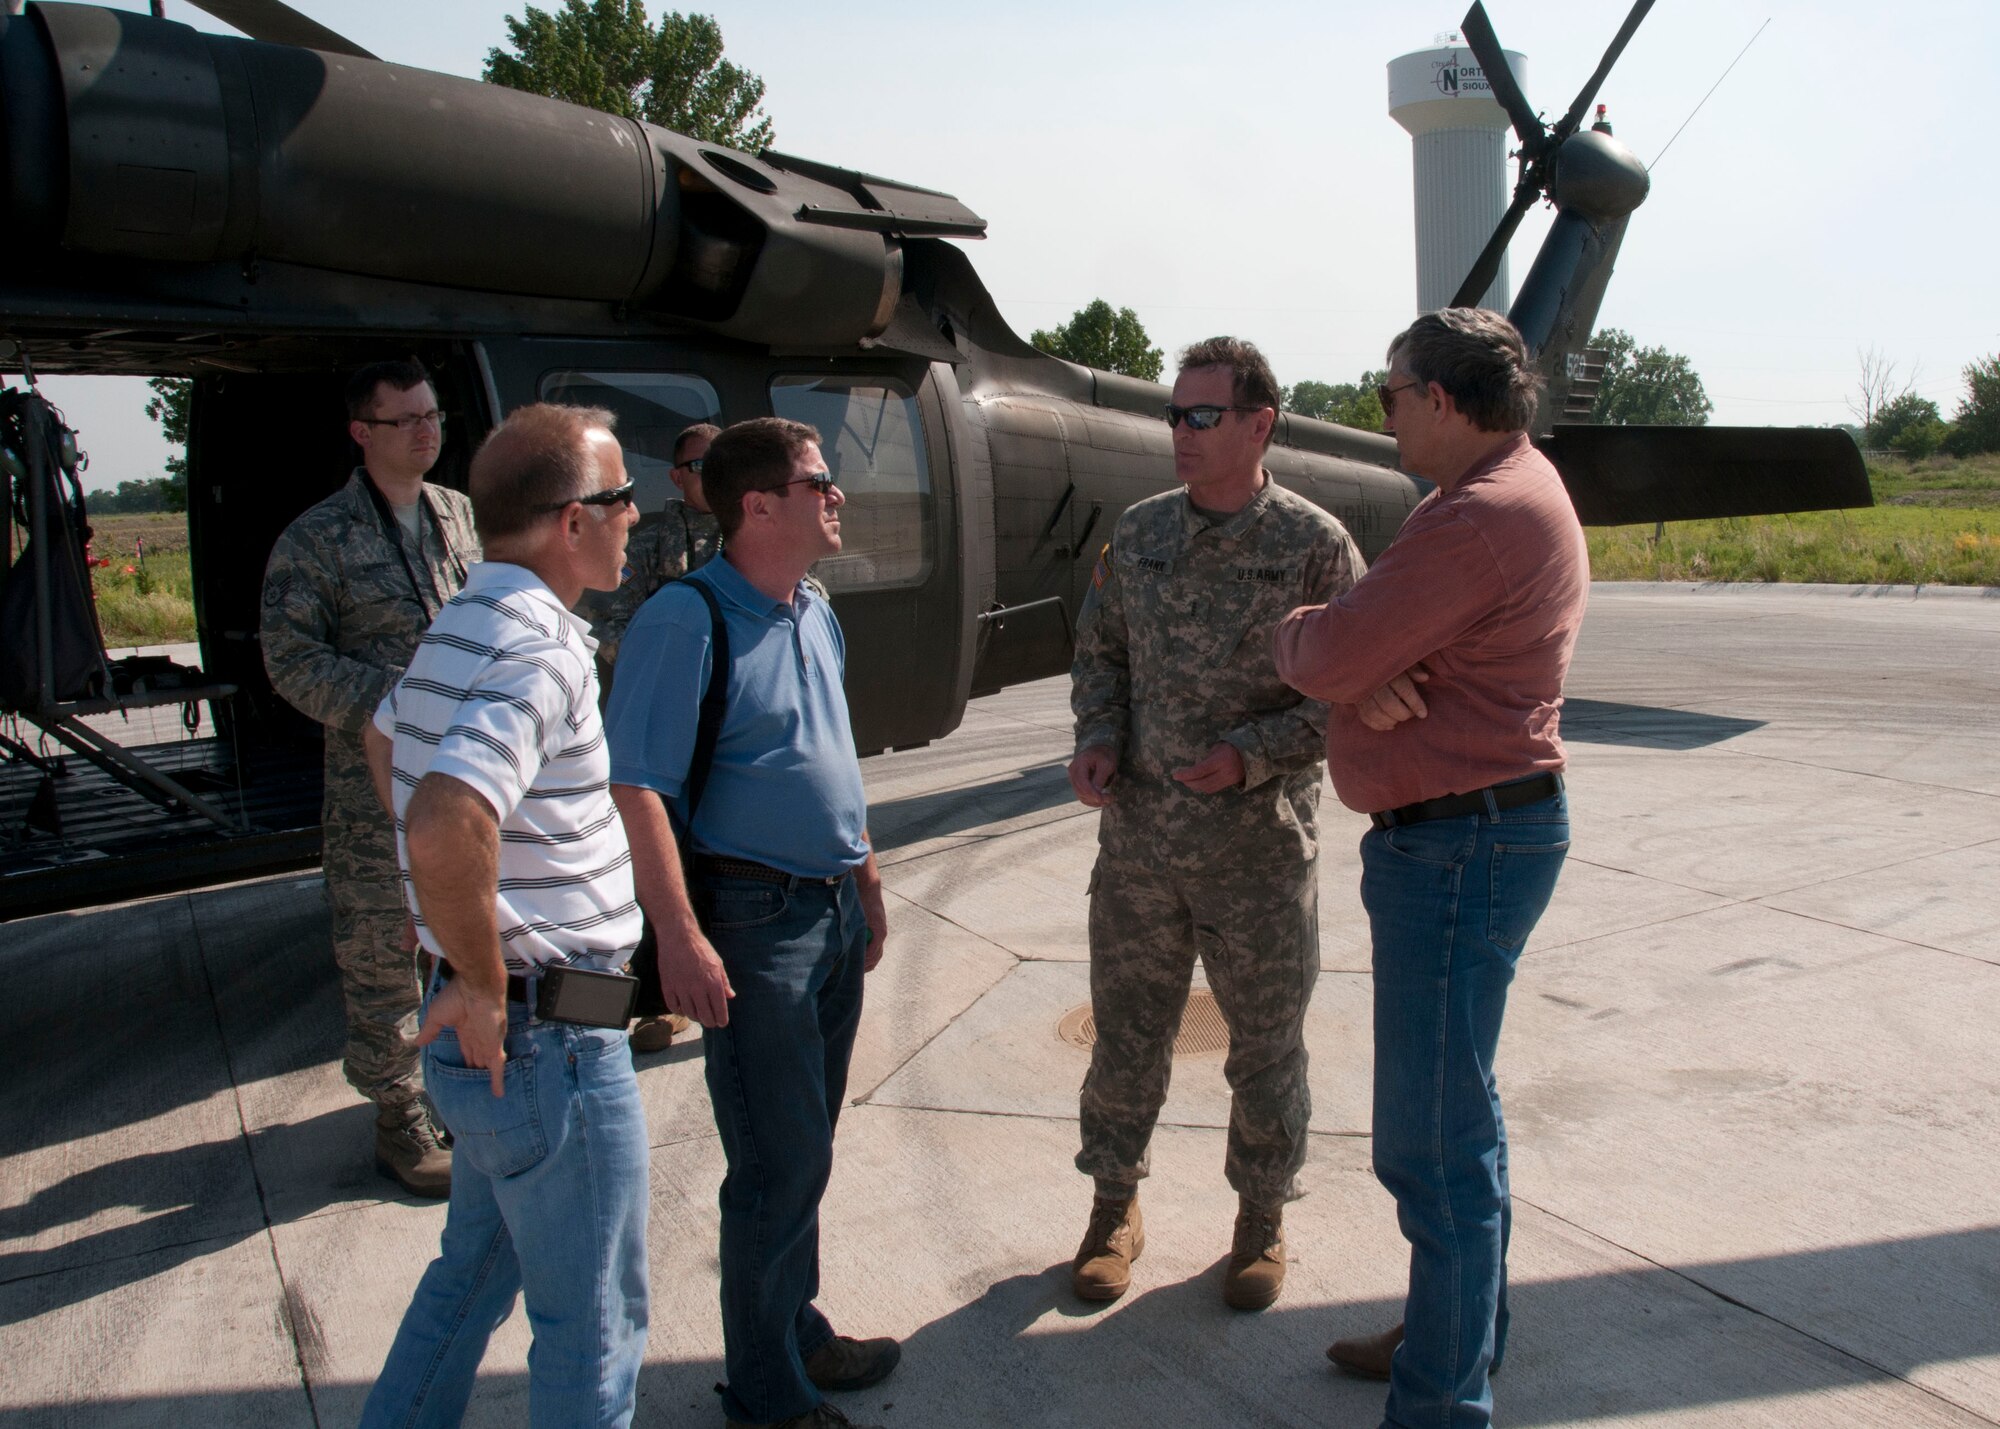 Chief Warrant Officer Christian Franks (Center), South Dakota’s Army Aviation Safety Officer,  briefs (from left) Rick Wagner, from Wagner Construction, Tim Brown, from Brown Construction, and South Dakota’s Secretary of Agriculture Walt Bones, prior to taking a aerial tour of the Missouri river flood zone, on June 8, 2011.  Bones, Wagner and Brown assessed the current damages and the potential threats caused by the increasing Missouri river flood levels.
Air Force Photo by: Tech. Sgt. Oscar Sanchez
